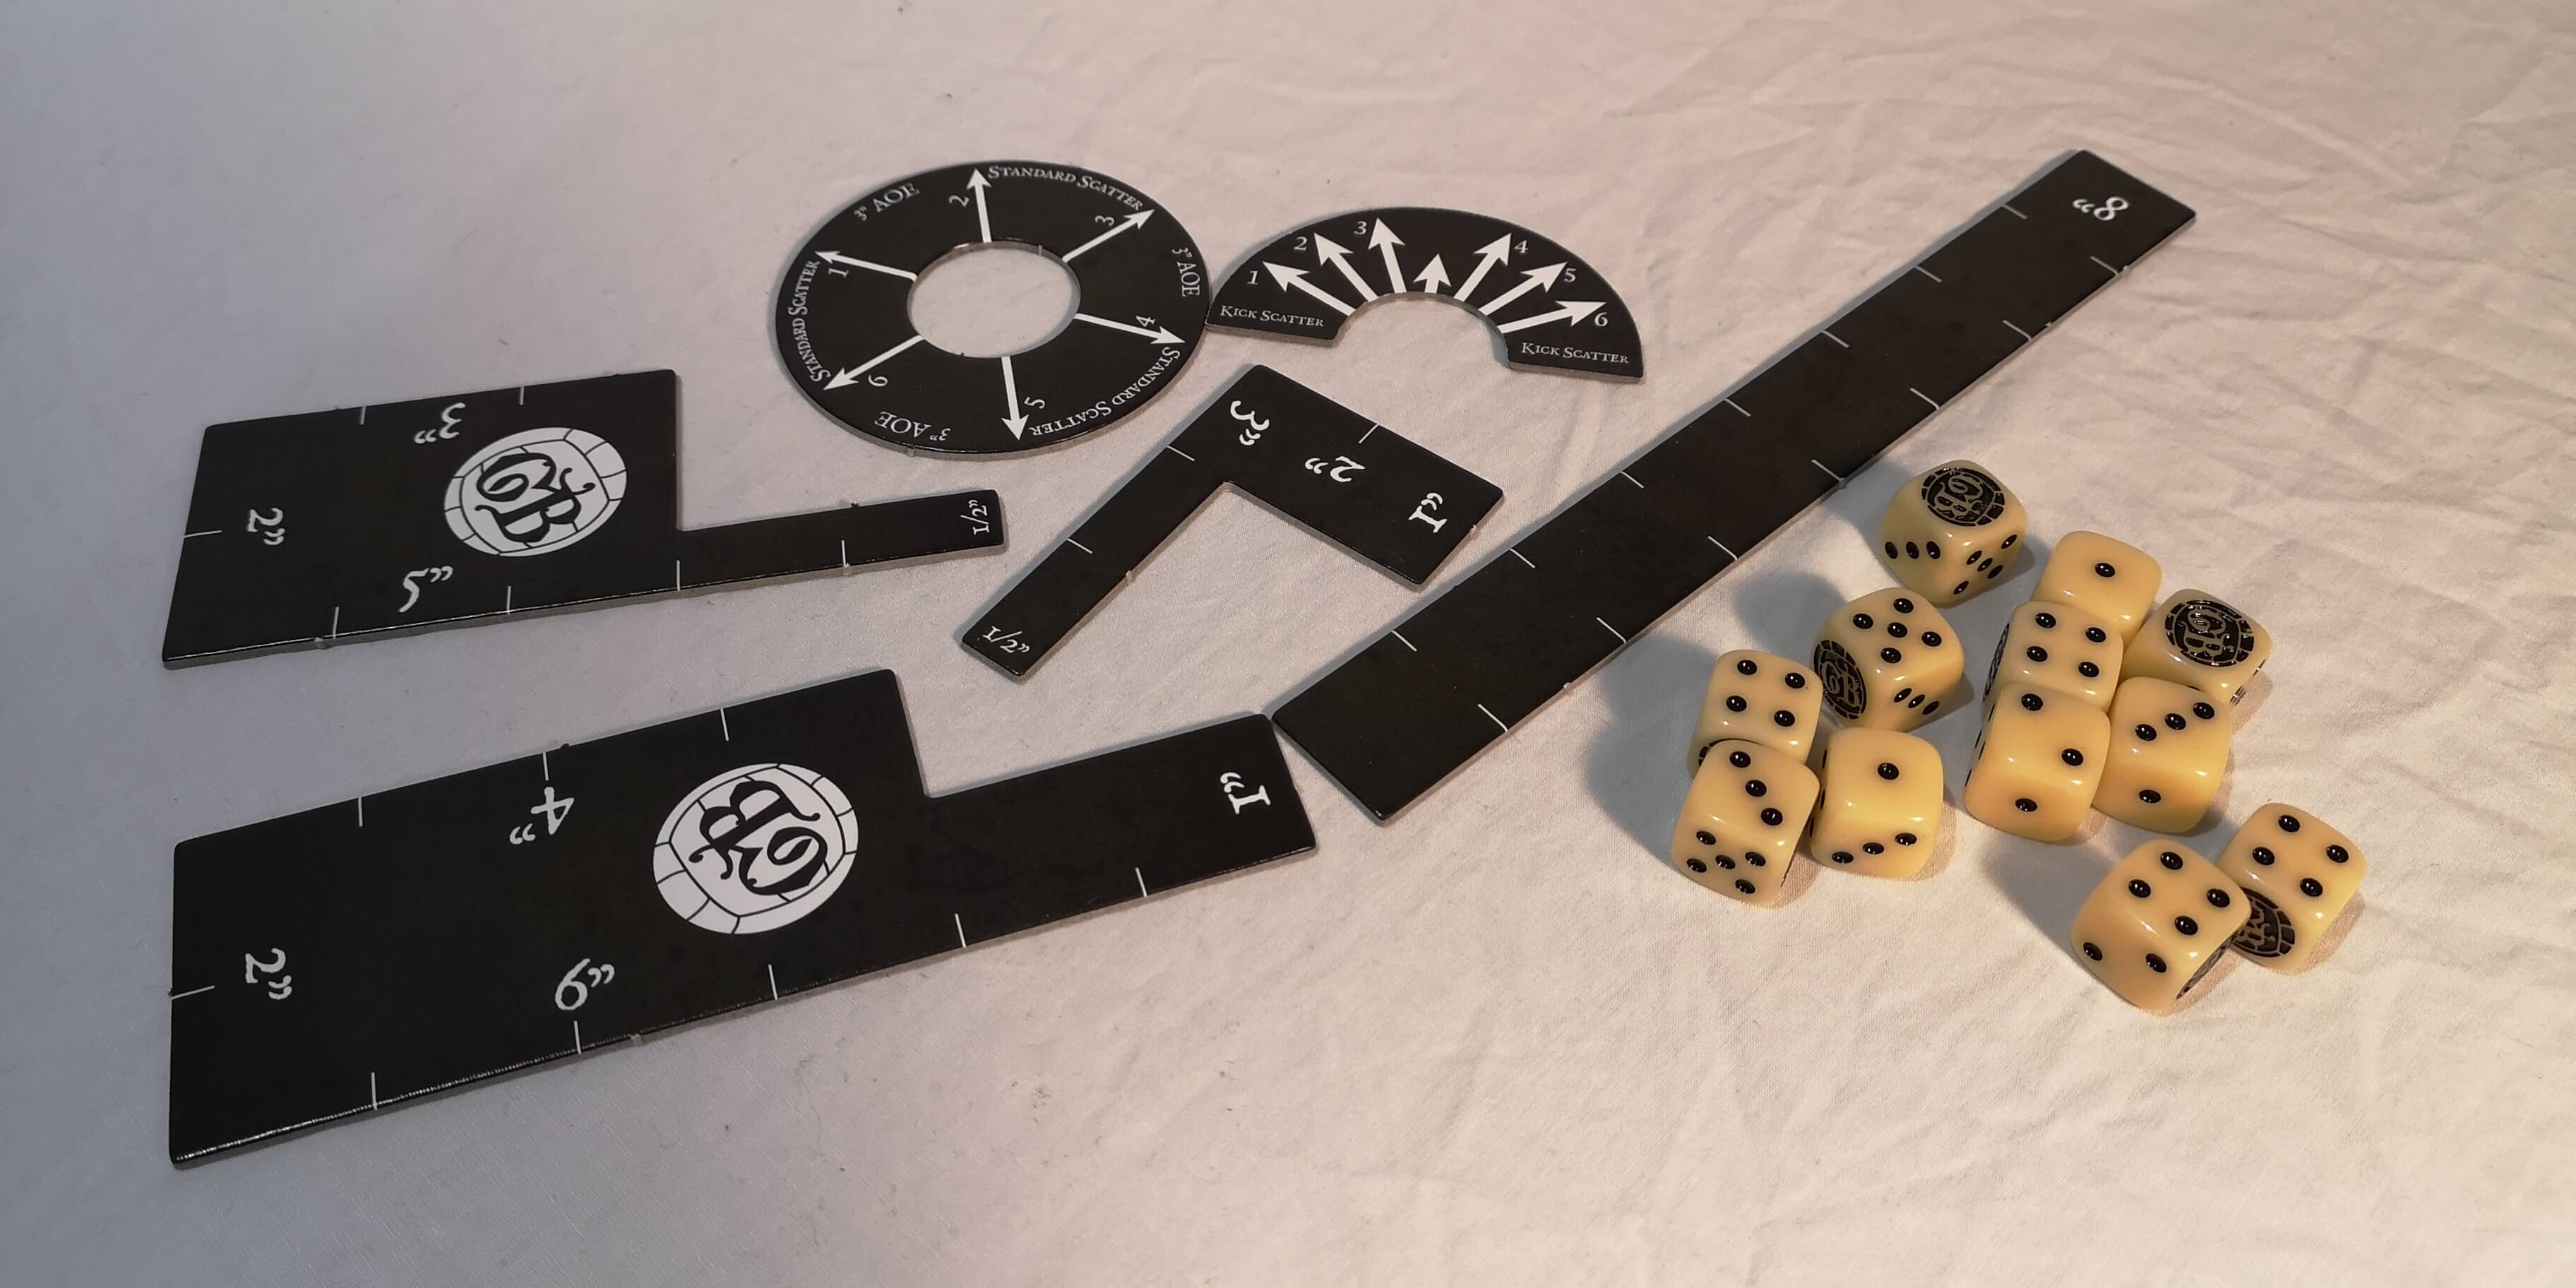 Guild Ball templates and dice.